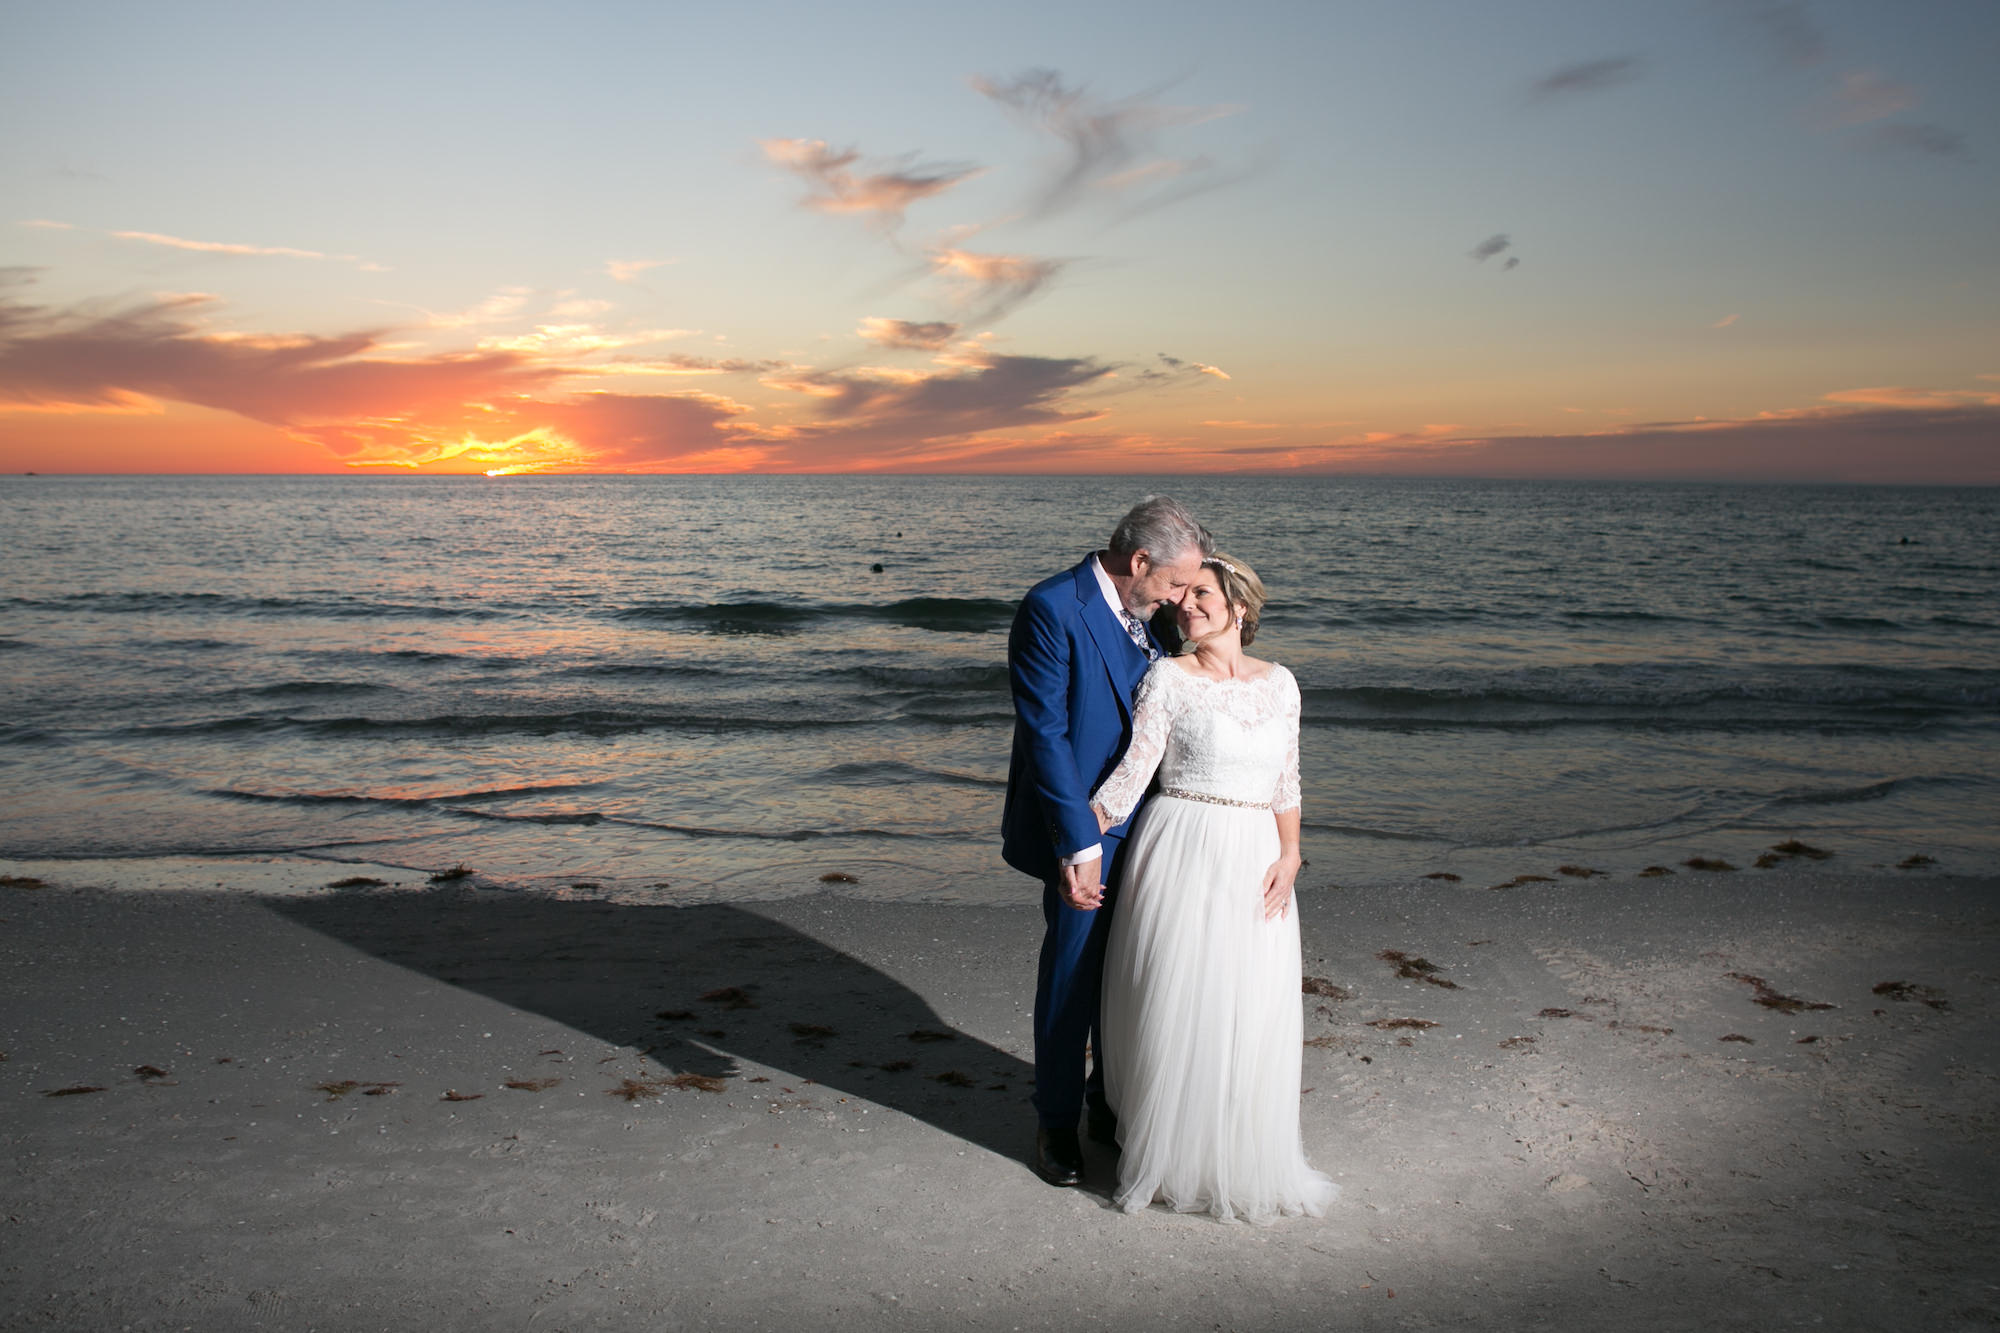 Sunset Classic Bride and Groom on Beach of St. Pete Historic Wedding Venue The Don CeSar | Wedding Photographer Carrie Wildes Photography